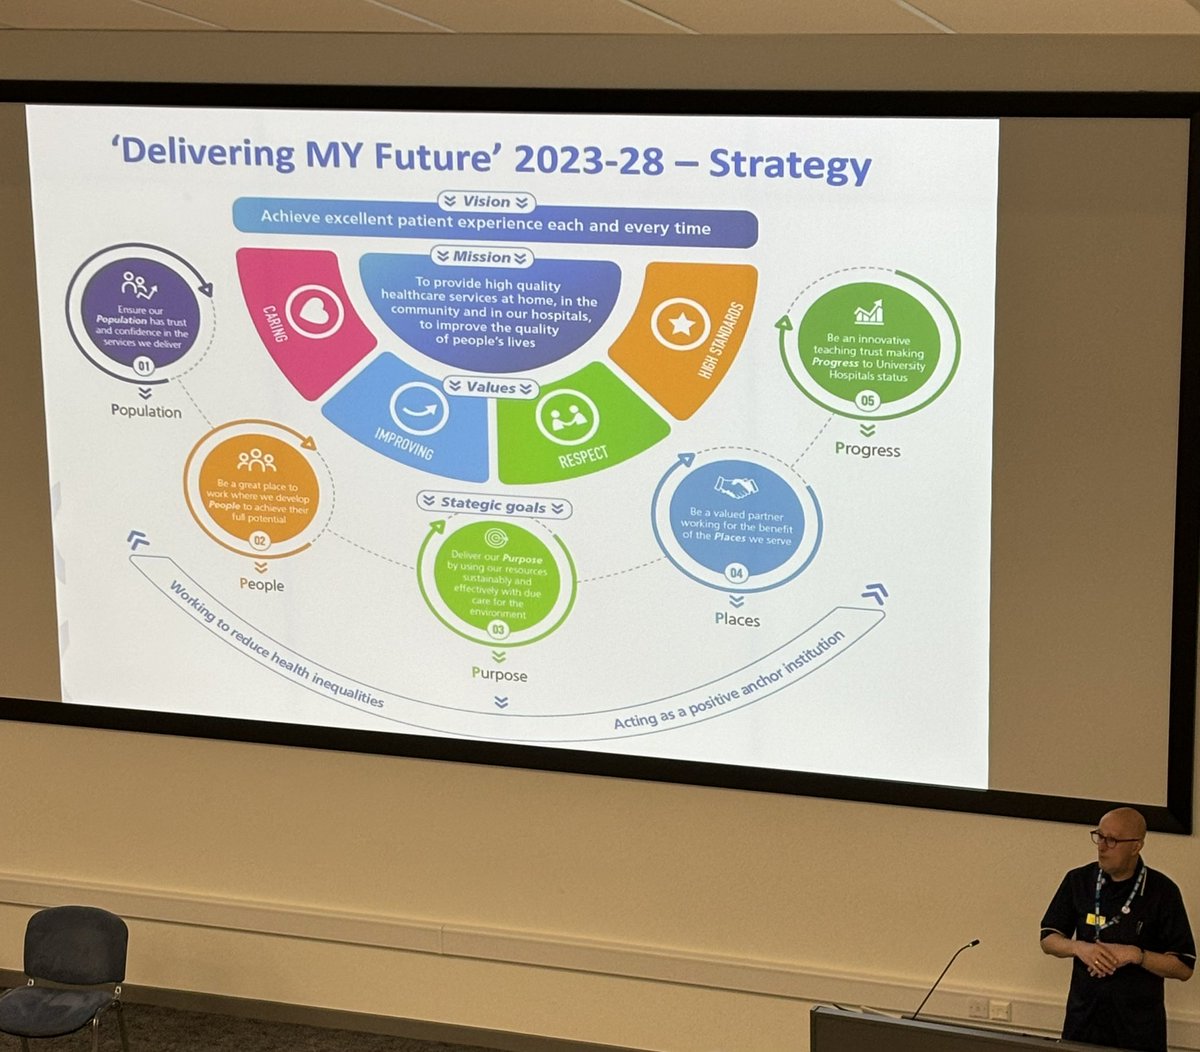 Quickly hot on David’s heals is our CNO @tamedprince expanding on our Quality journey at @MidYorkshireNHS and sharing our exciting achievements in 2023/24 and what our focus is for 2024/25 #OutJourneyToOutstanding . Look out for us in the market place and break out groups 🙌